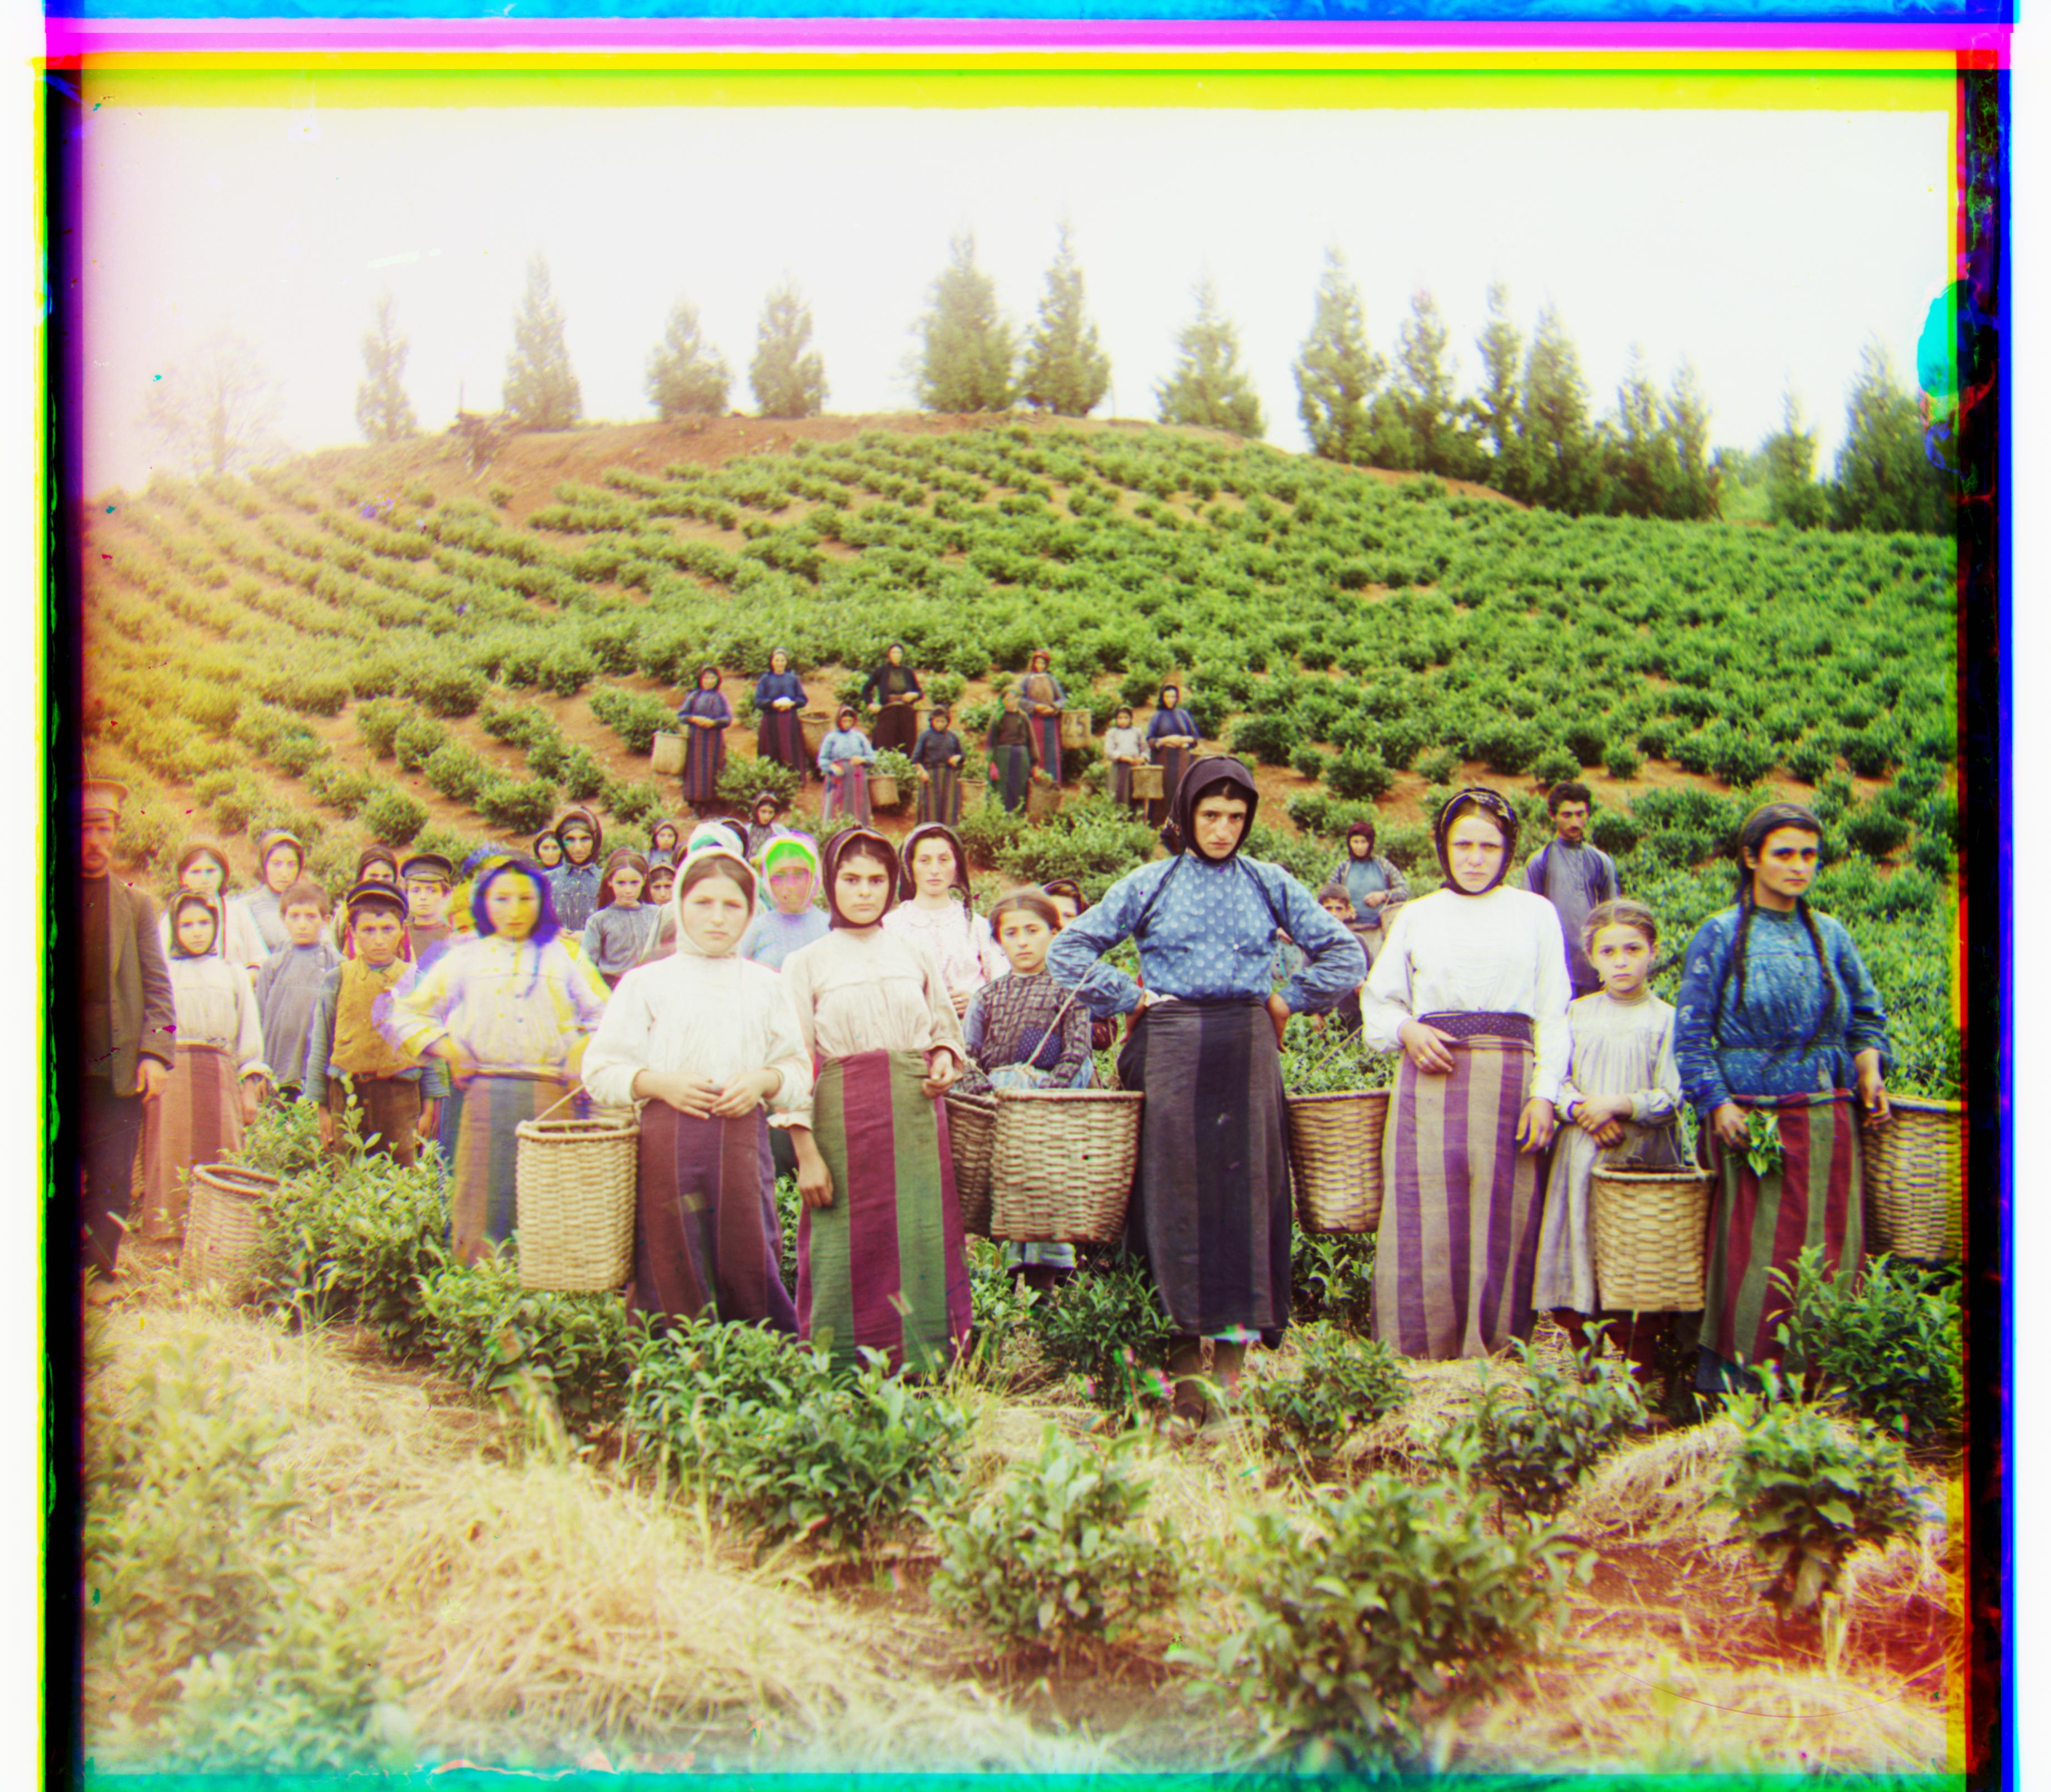 Colored harvesters